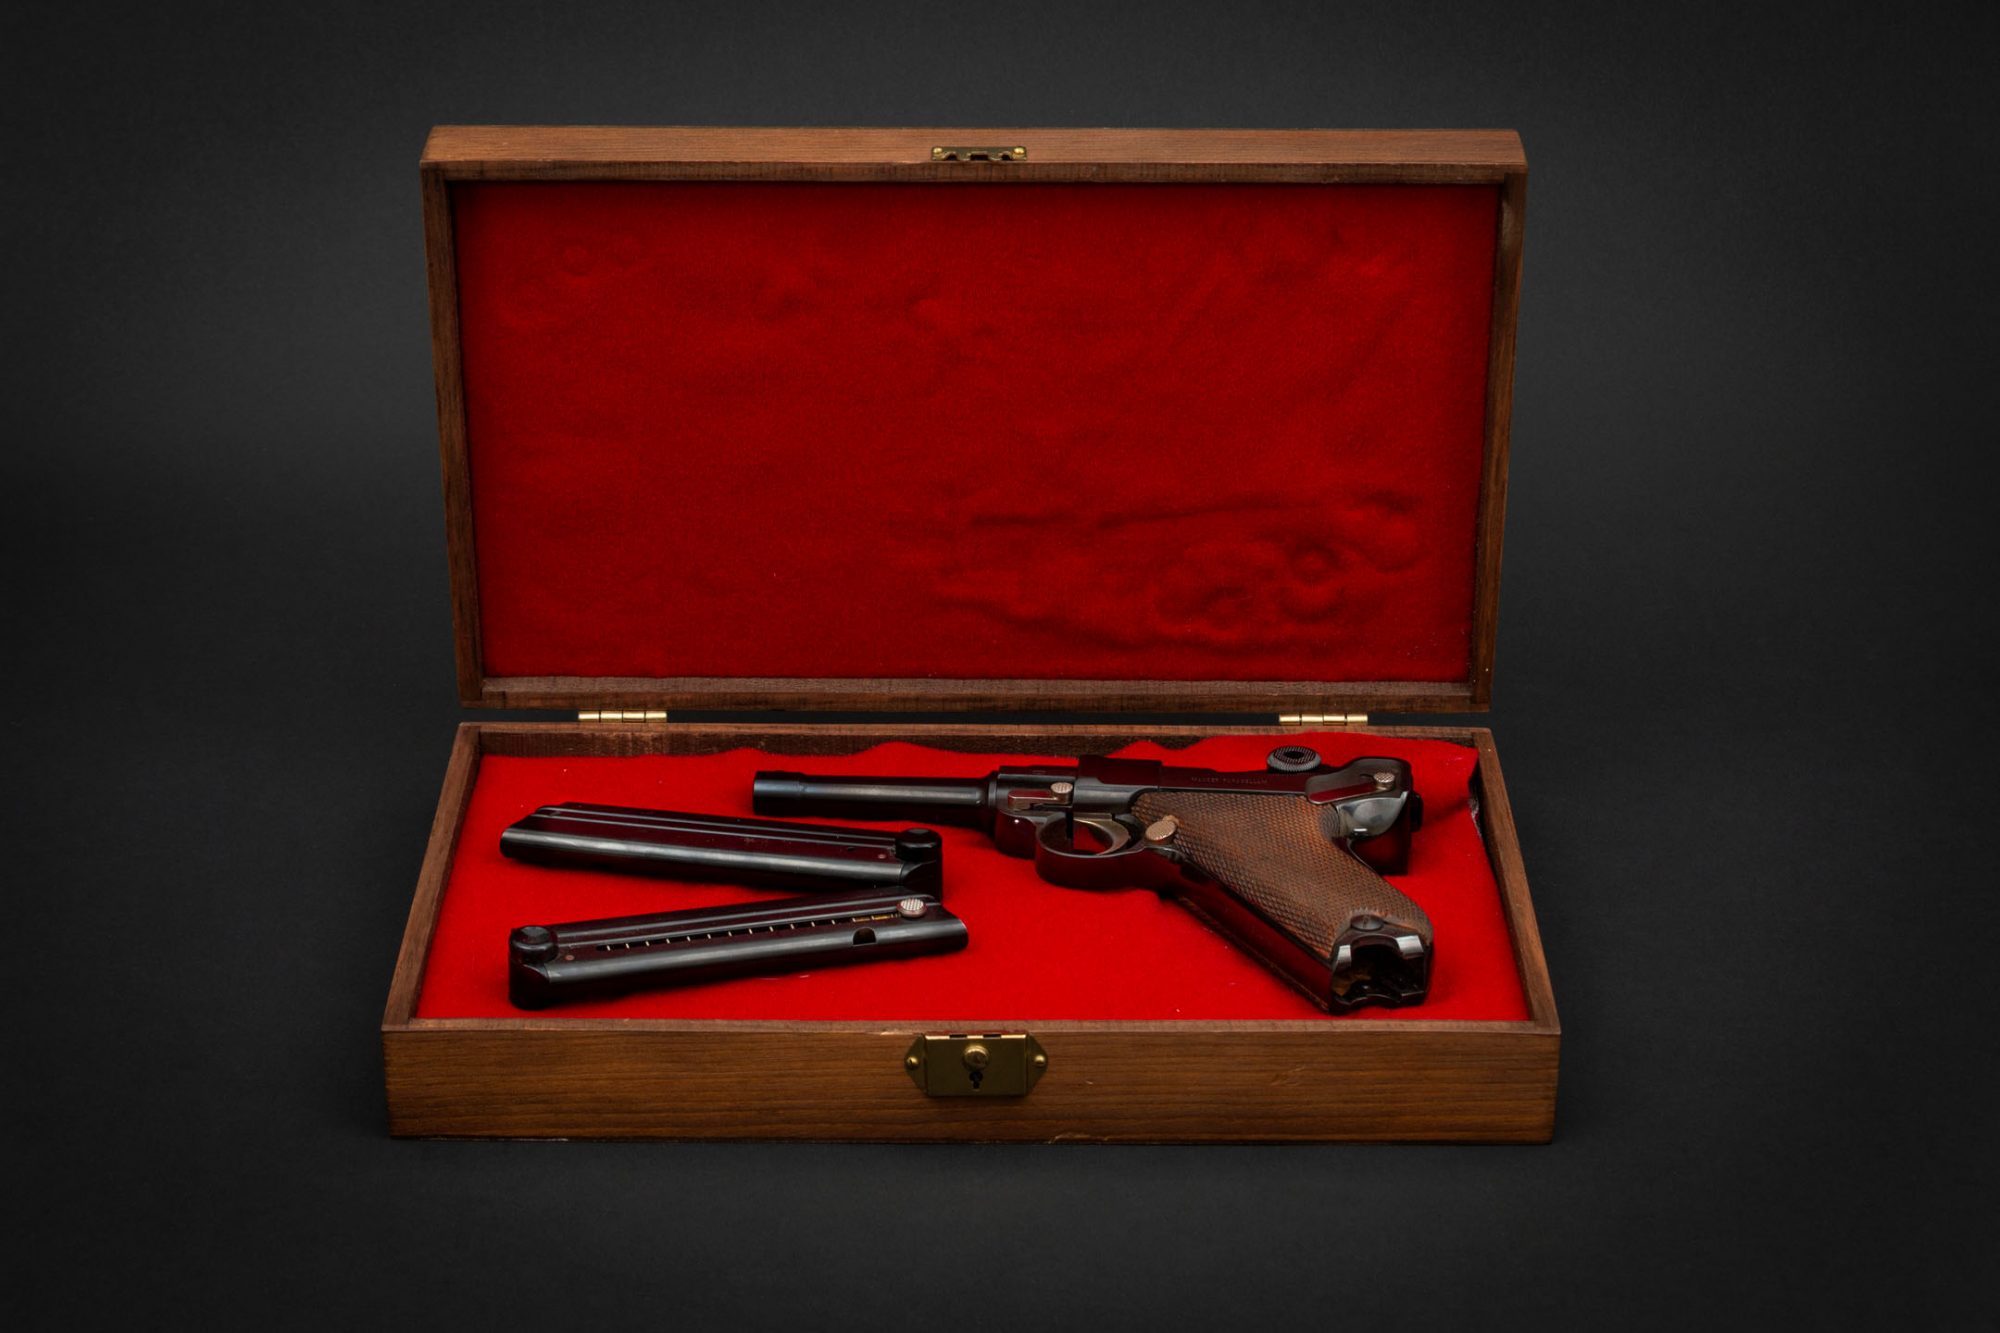 Case for Interarms Mauser Parabellum in 9mm, for sale by Turnbull Restoration Co. of Bloomfield, NY